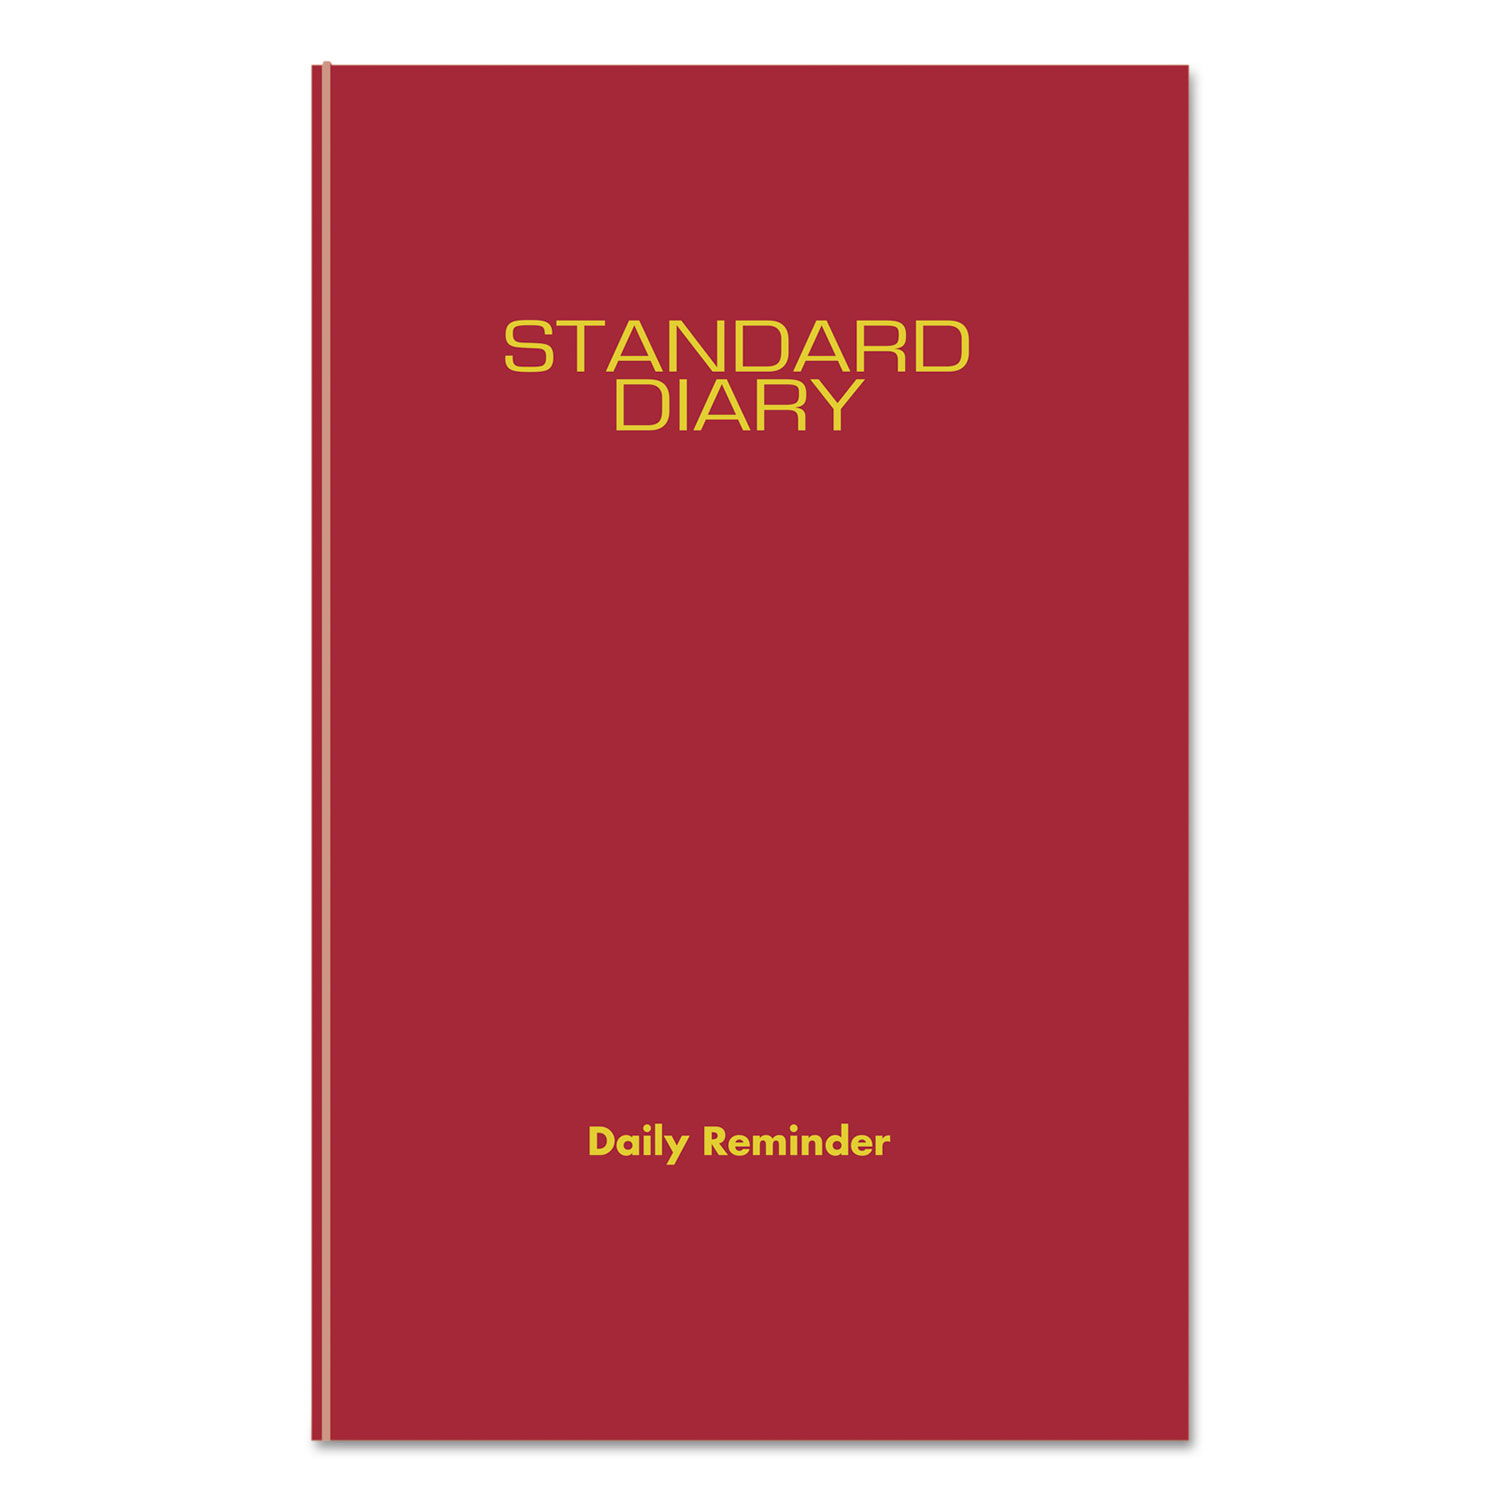 Standard Diary Recycled Daily Reminder, Red, 5 3/4 x 8 1/4, 2018